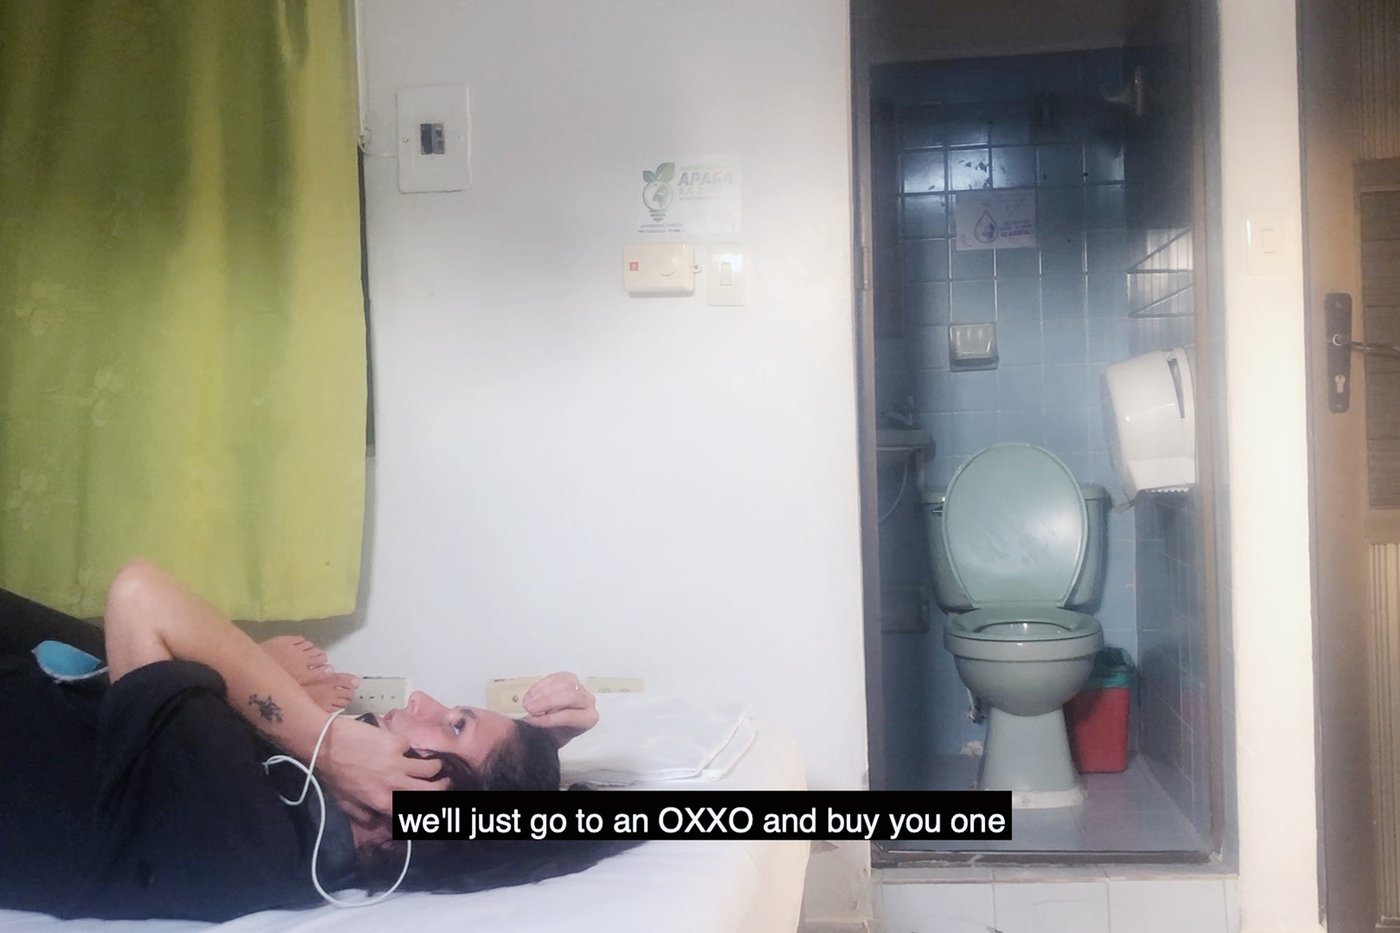 The image shows a still from the video CEREAL, a person is lying on the bed and talking on the phone, the following subtitles can be read on it "we'll just go to an OXXO and buy you one".